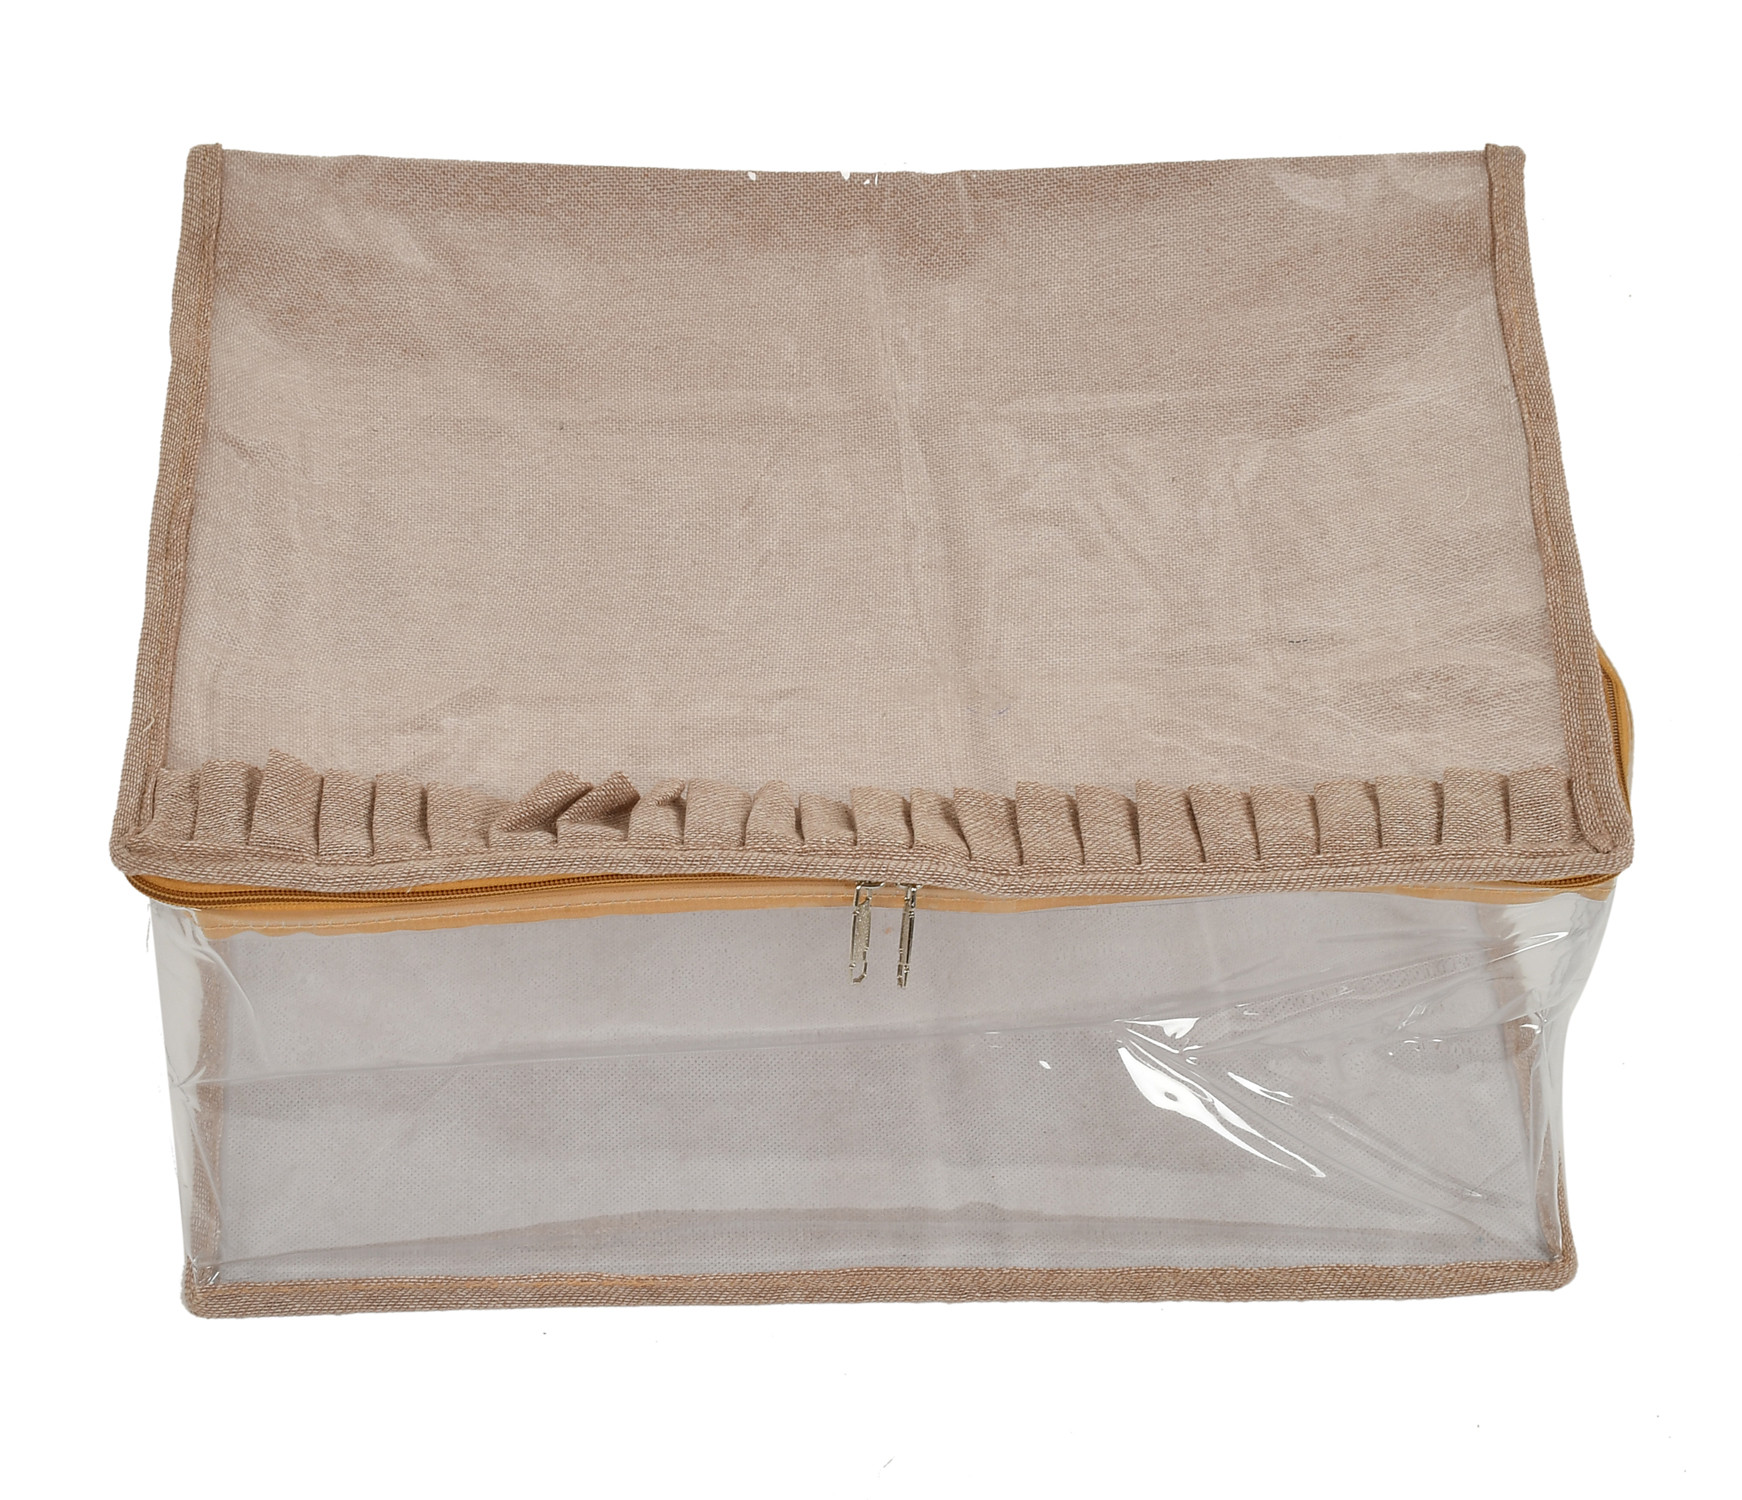 Kuber Industries Laminated Transparent Waterproof Underbed Storage Bag, Storage Organiser For Quilts, Blankets, Pillows, Bedsheets, Towels, Summer and Winter Cloth (Ivory)-HS_38_KUBMART21449